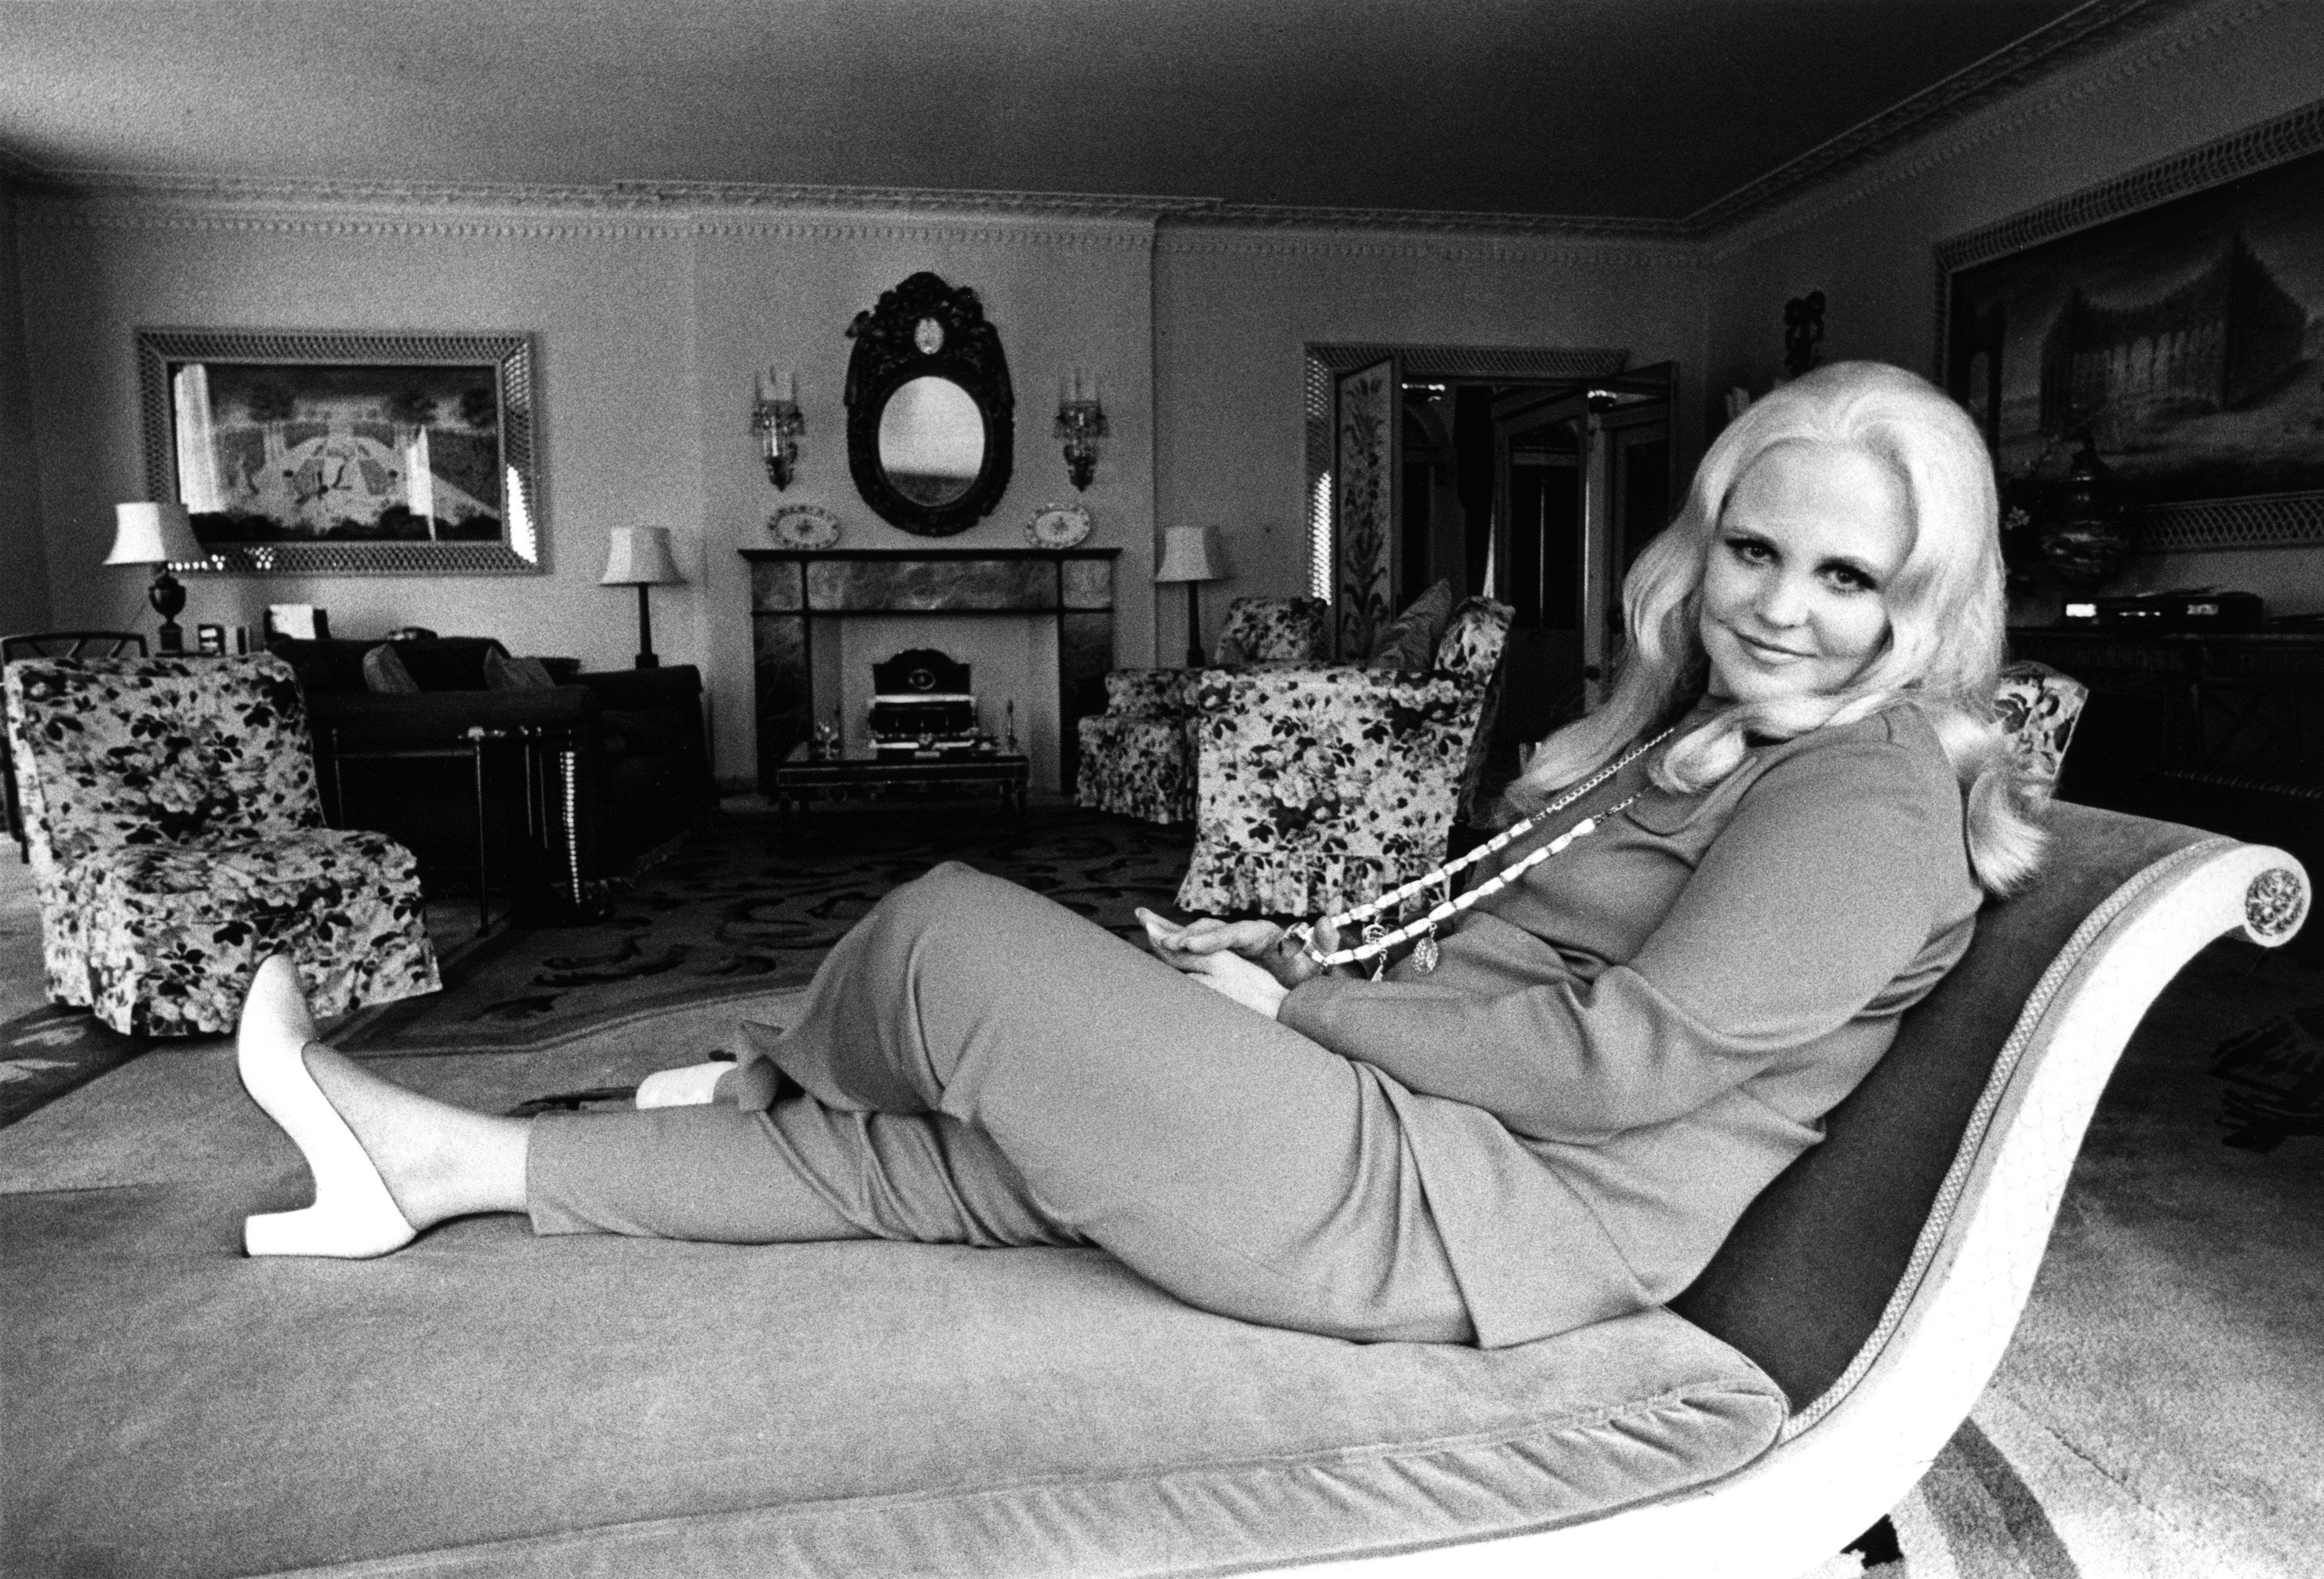 American singer Peggy Lee relcining on a chaise longue before a Royal Albert Hall concert, 1970 | Photo: Getty Images